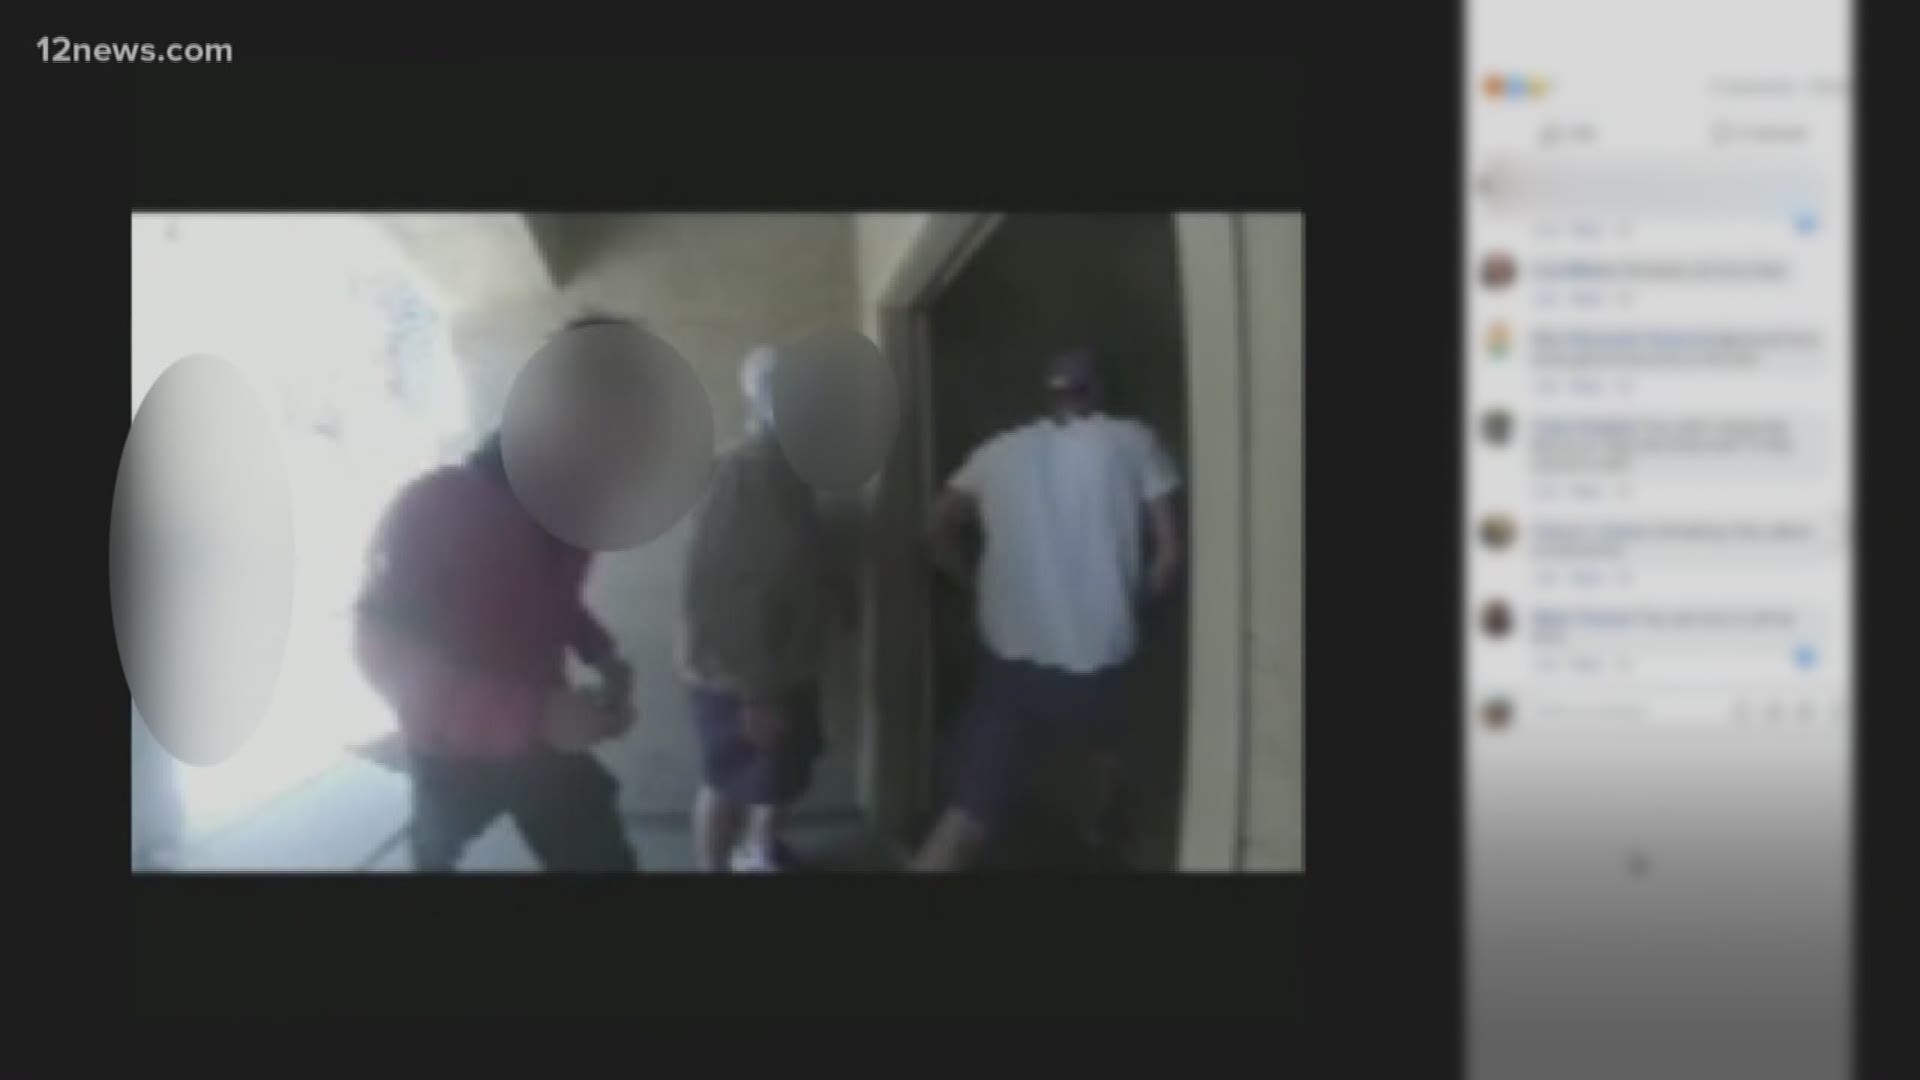 A group of teens were caught on camera breaking into homes in Laveen. Police have arrested all five of the suspects connected to the robberies.